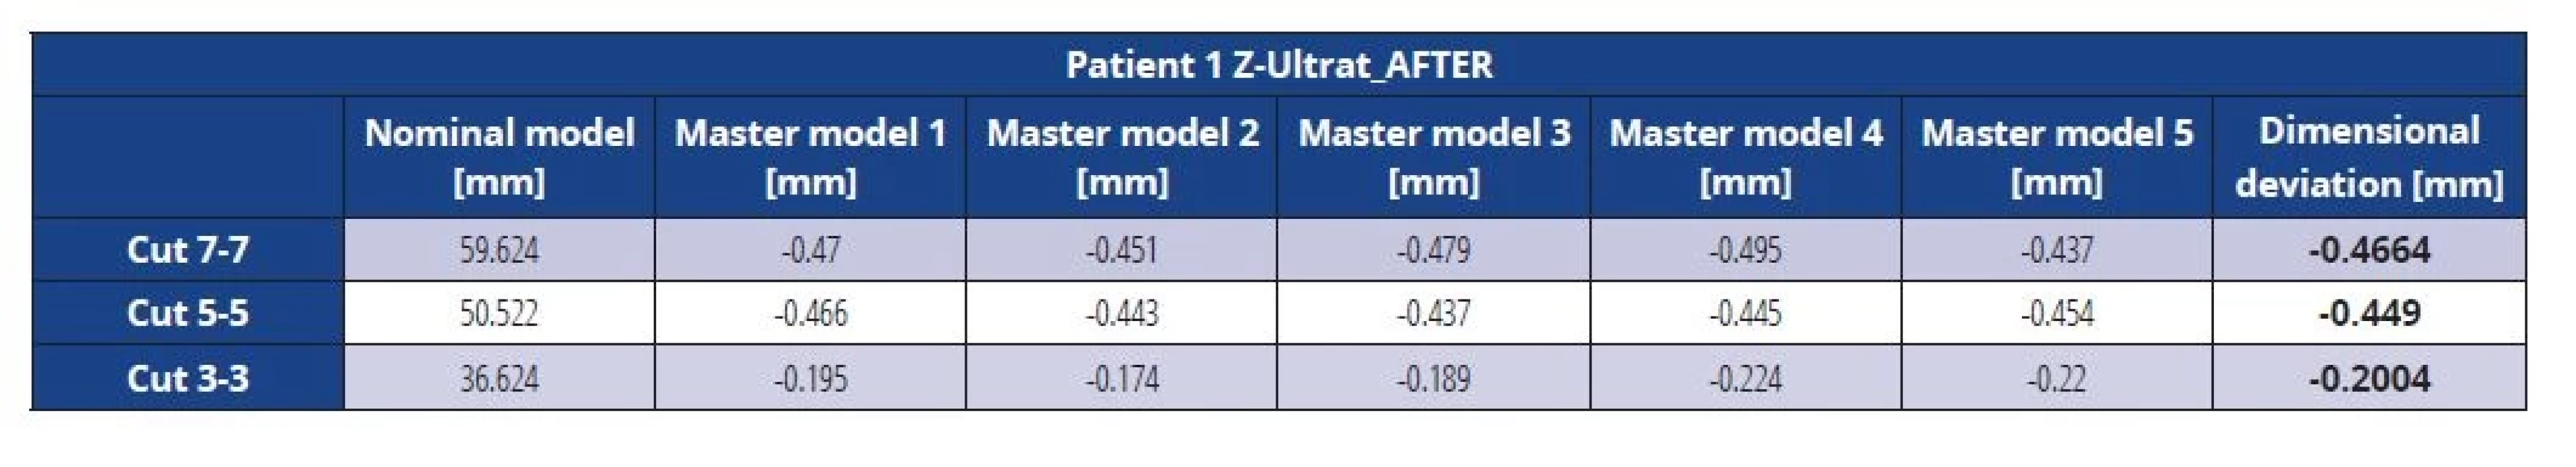 Dimensional deviations of the Z-Ultrat master model after vacuuming (patient 1)